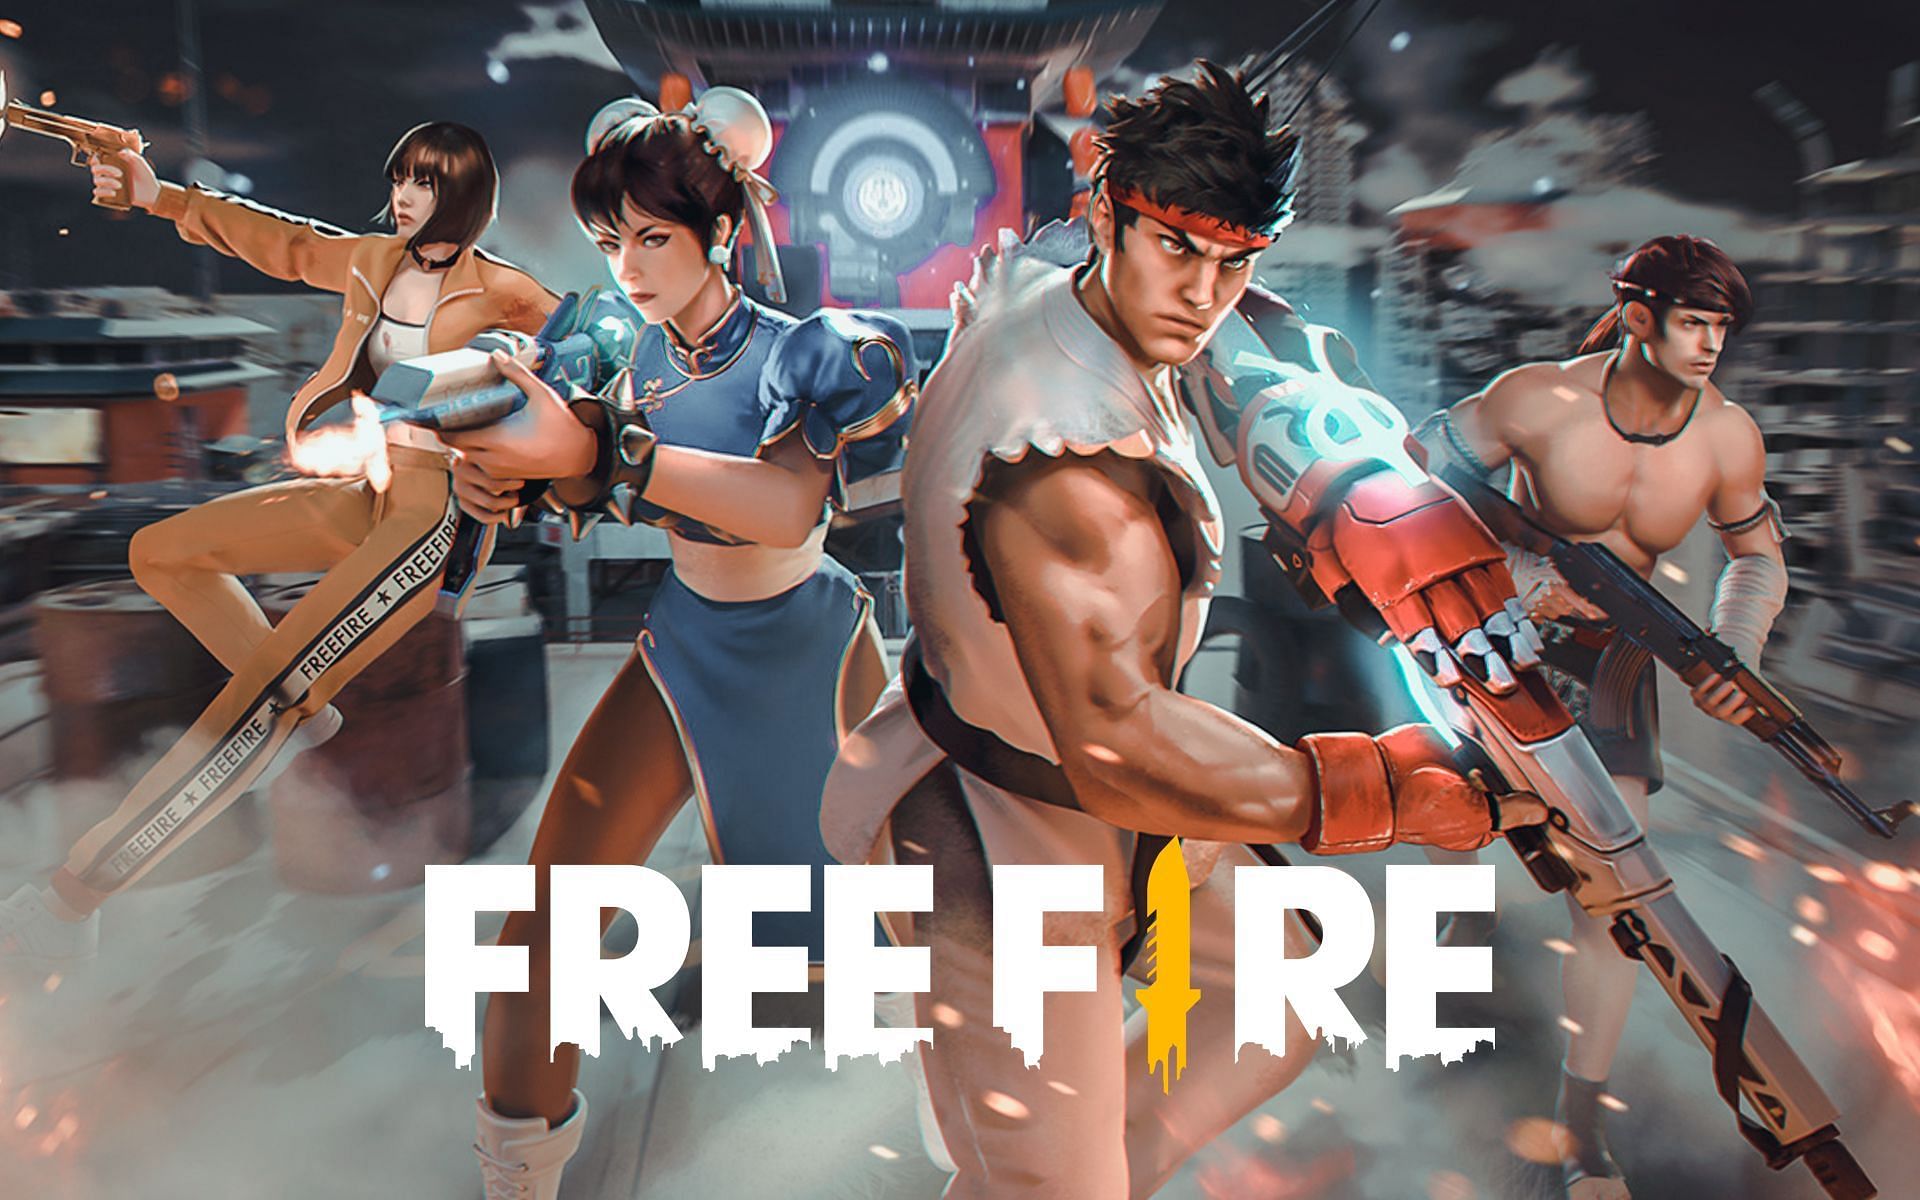 Details on using Free Fire redeem codes on the Rewards Redemption Site (Image via Free Fire)